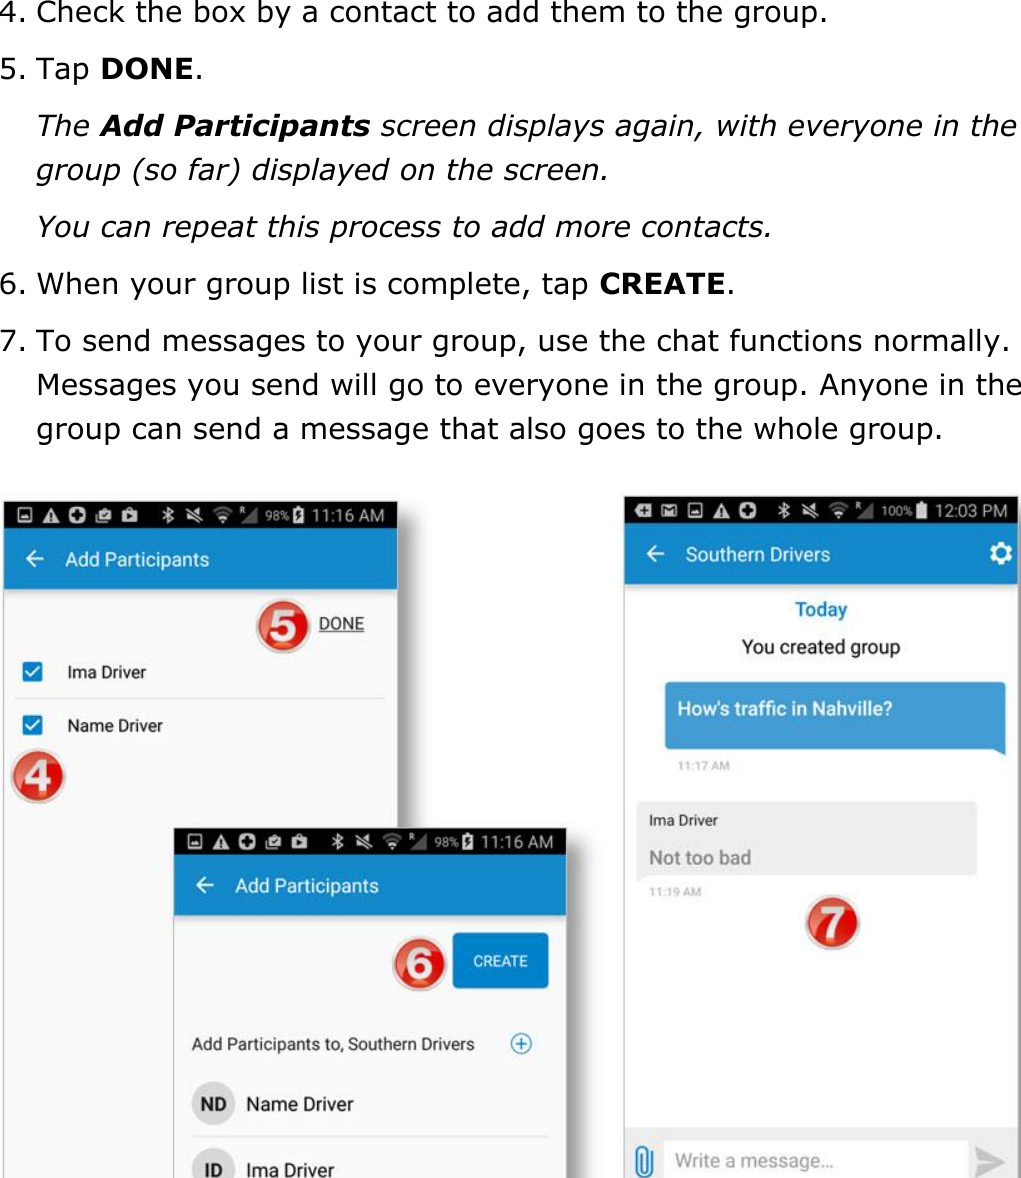 Send Messages, Forms, and Workflows DriverConnect User Guide  73 © 2017, Rand McNally, Inc. 4. Check the box by a contact to add them to the group. 5. Tap DONE. The Add Participants screen displays again, with everyone in the group (so far) displayed on the screen. You can repeat this process to add more contacts. 6. When your group list is complete, tap CREATE. 7. To send messages to your group, use the chat functions normally. Messages you send will go to everyone in the group. Anyone in the group can send a message that also goes to the whole group.    